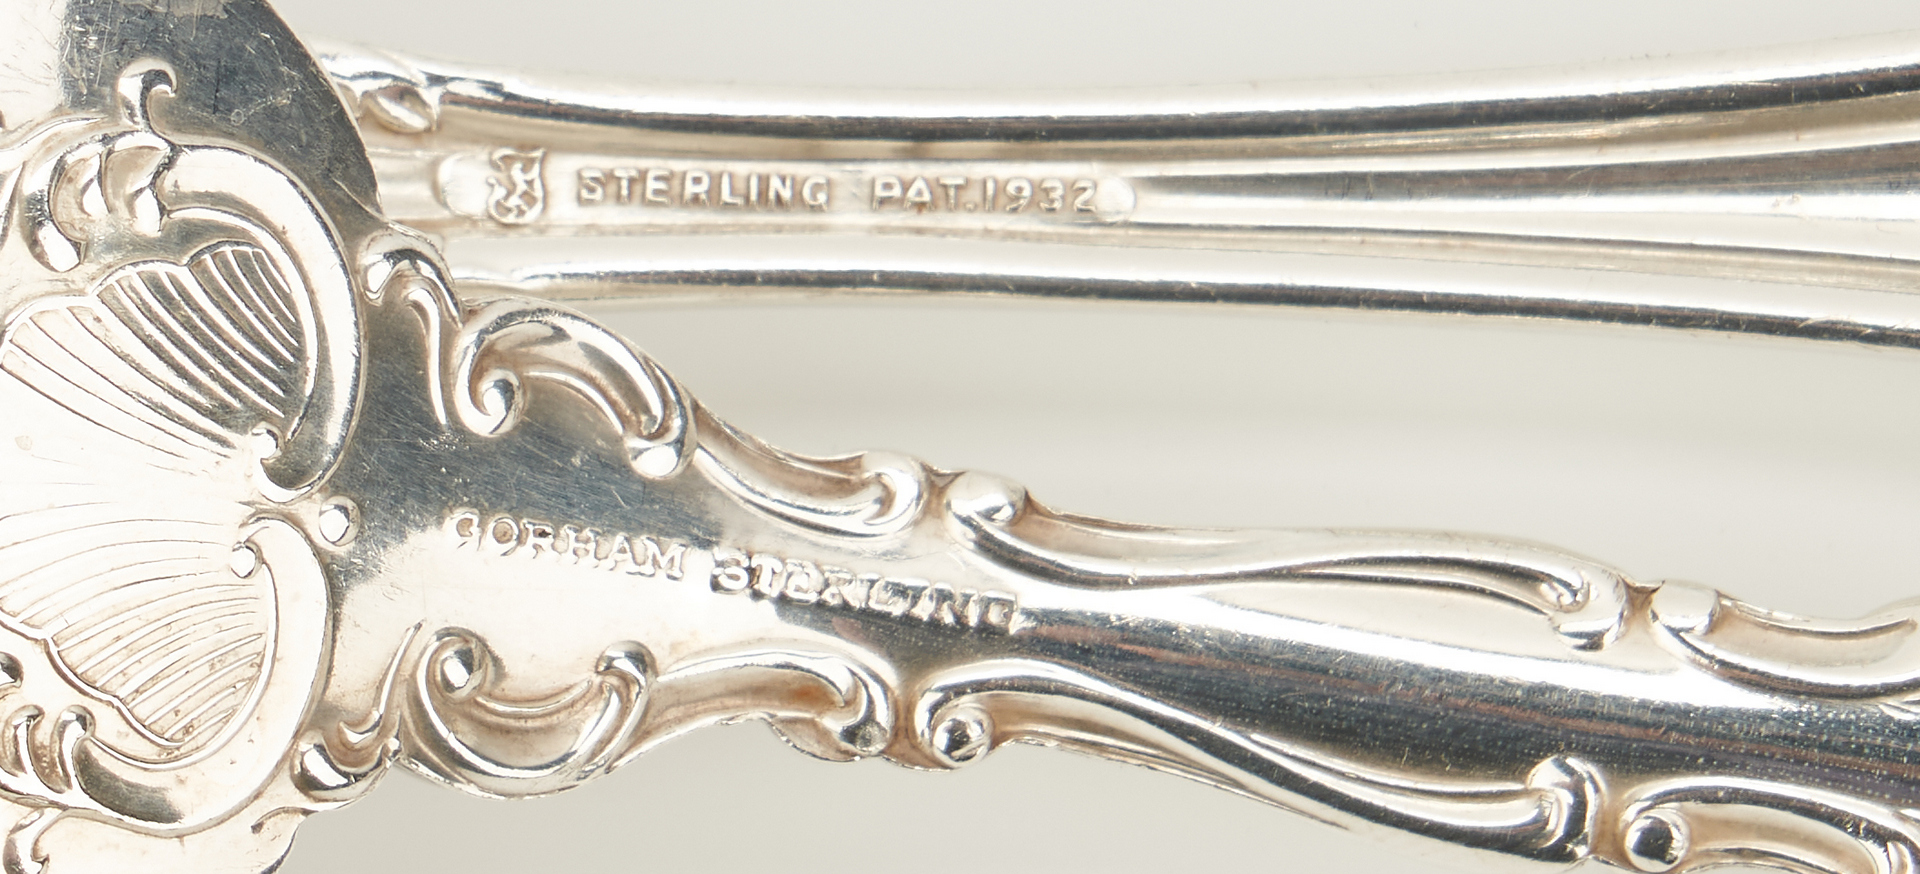 Lot 811: 38 pcs.  Sterling Flatware inc. Towle French Provincial